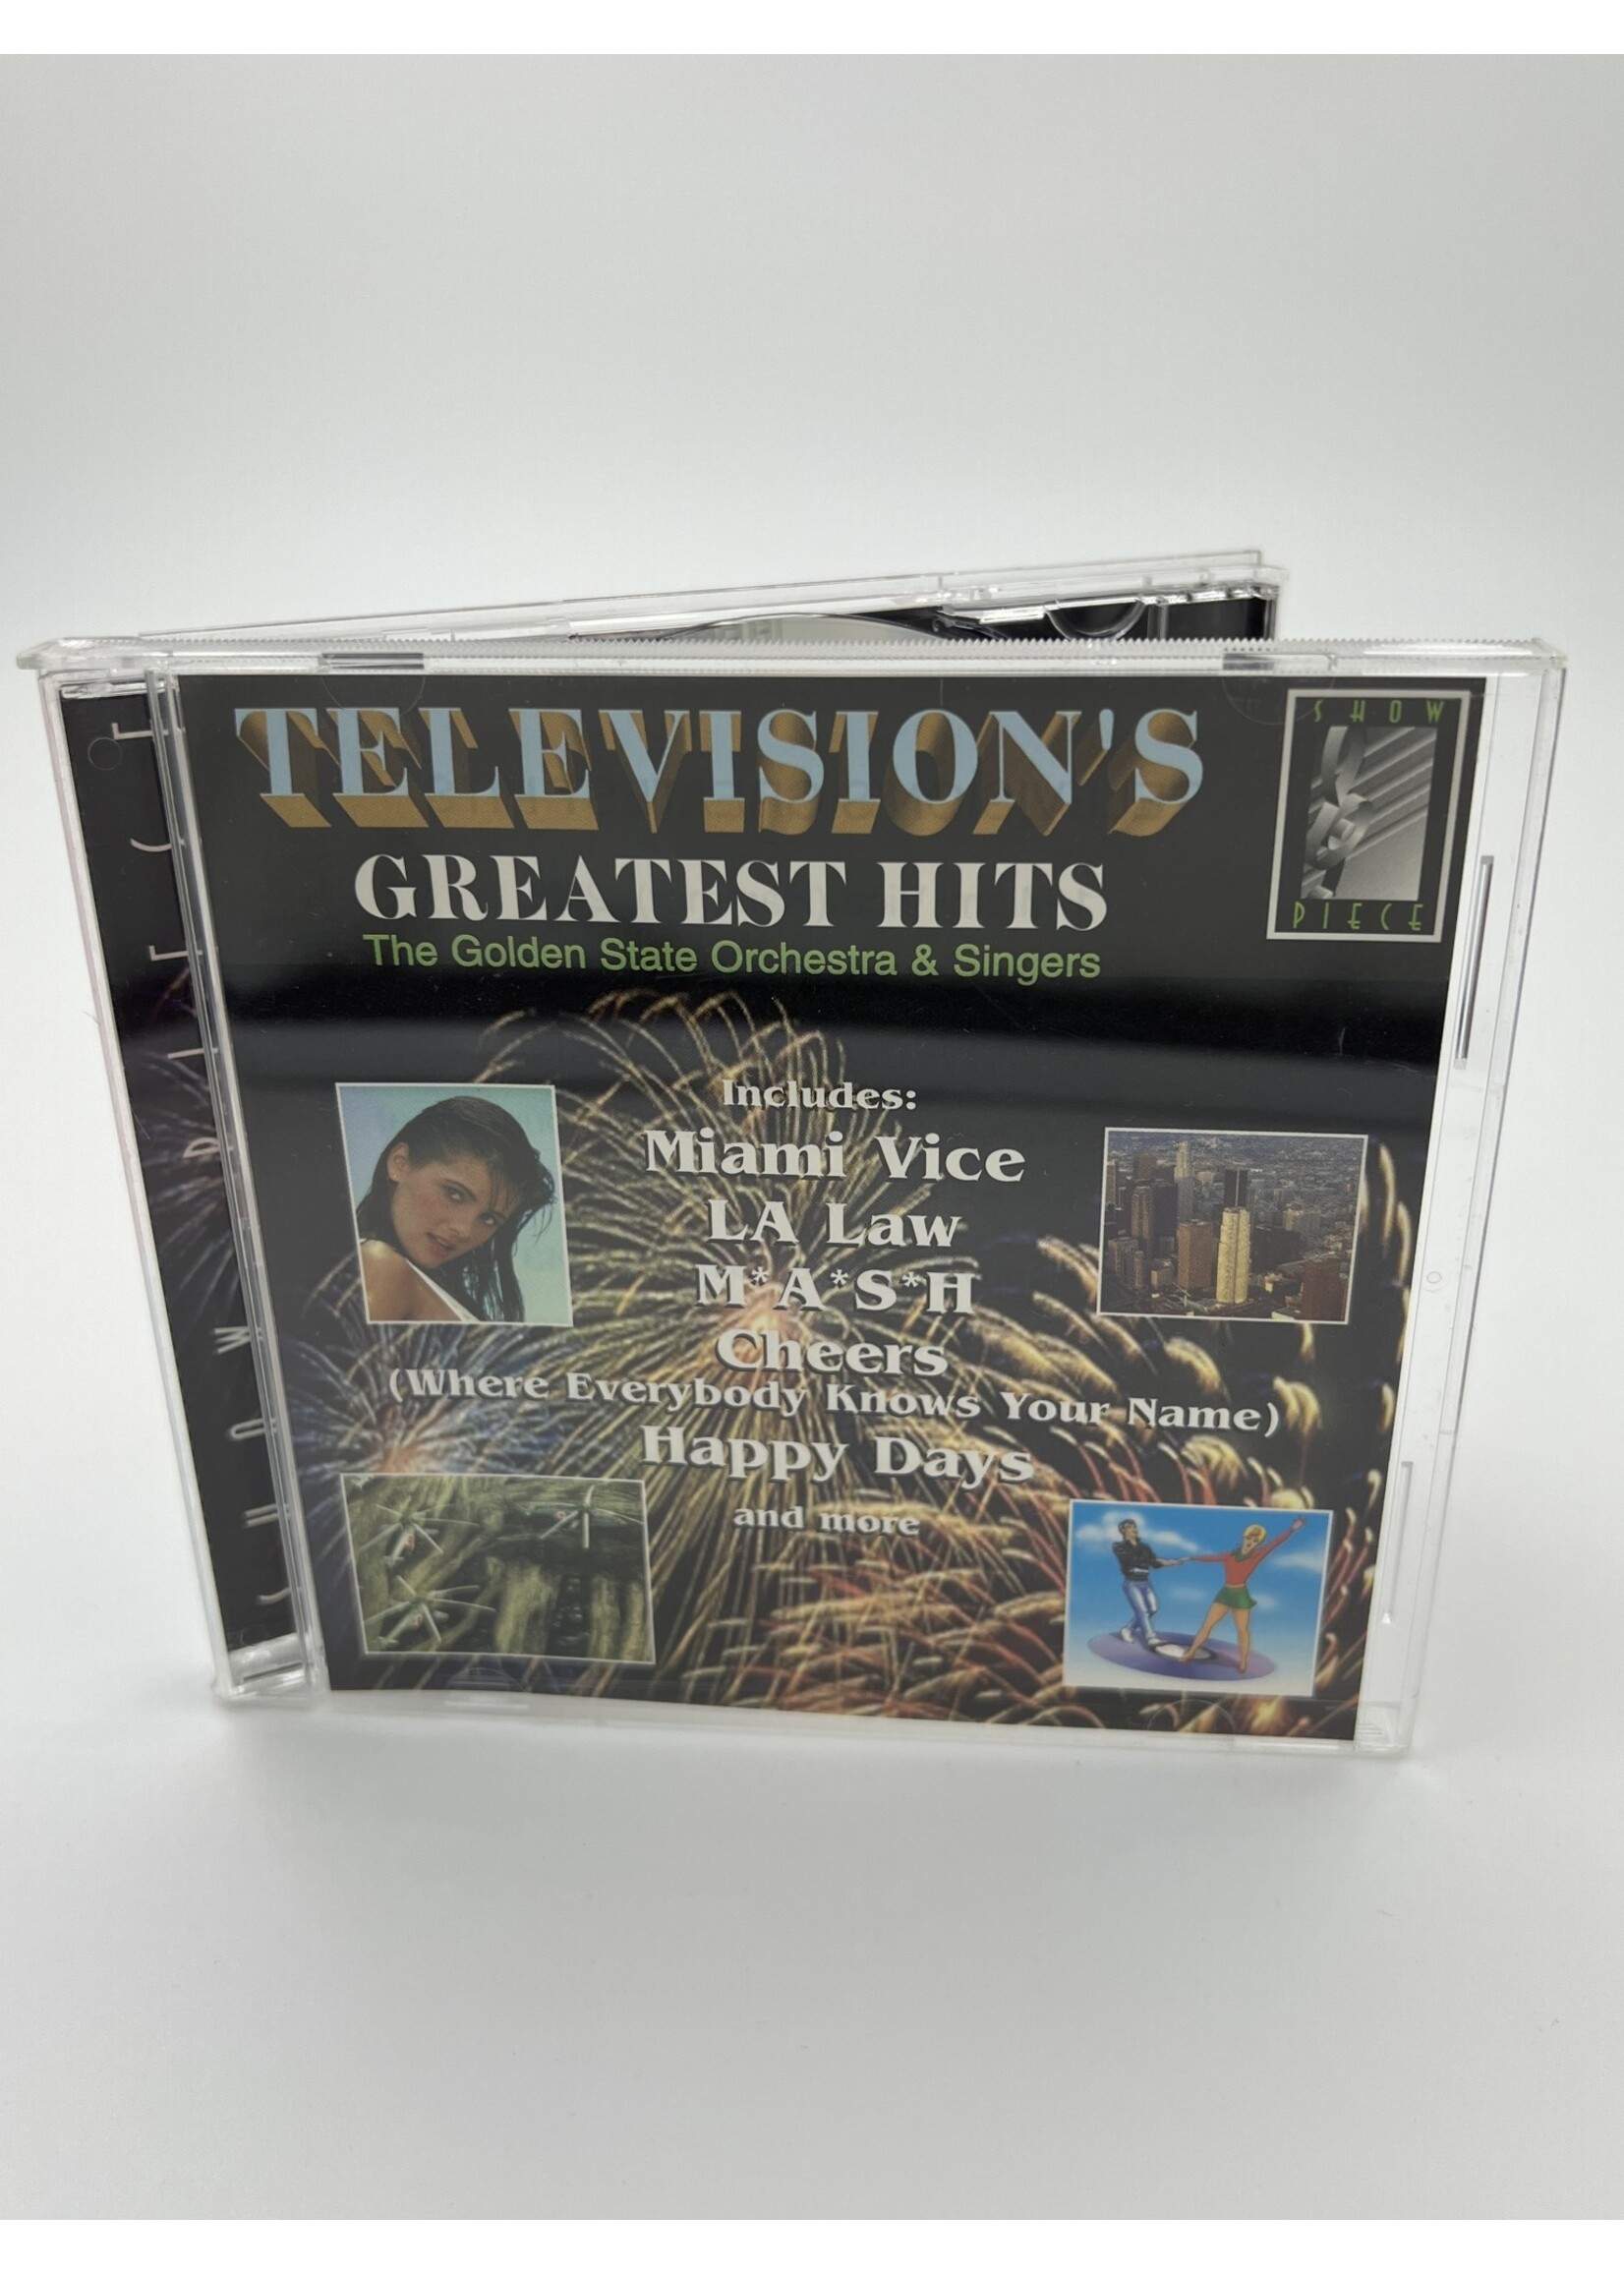 CD   Televisions Greatest Hits The Golden State Orchestra And Singers CD